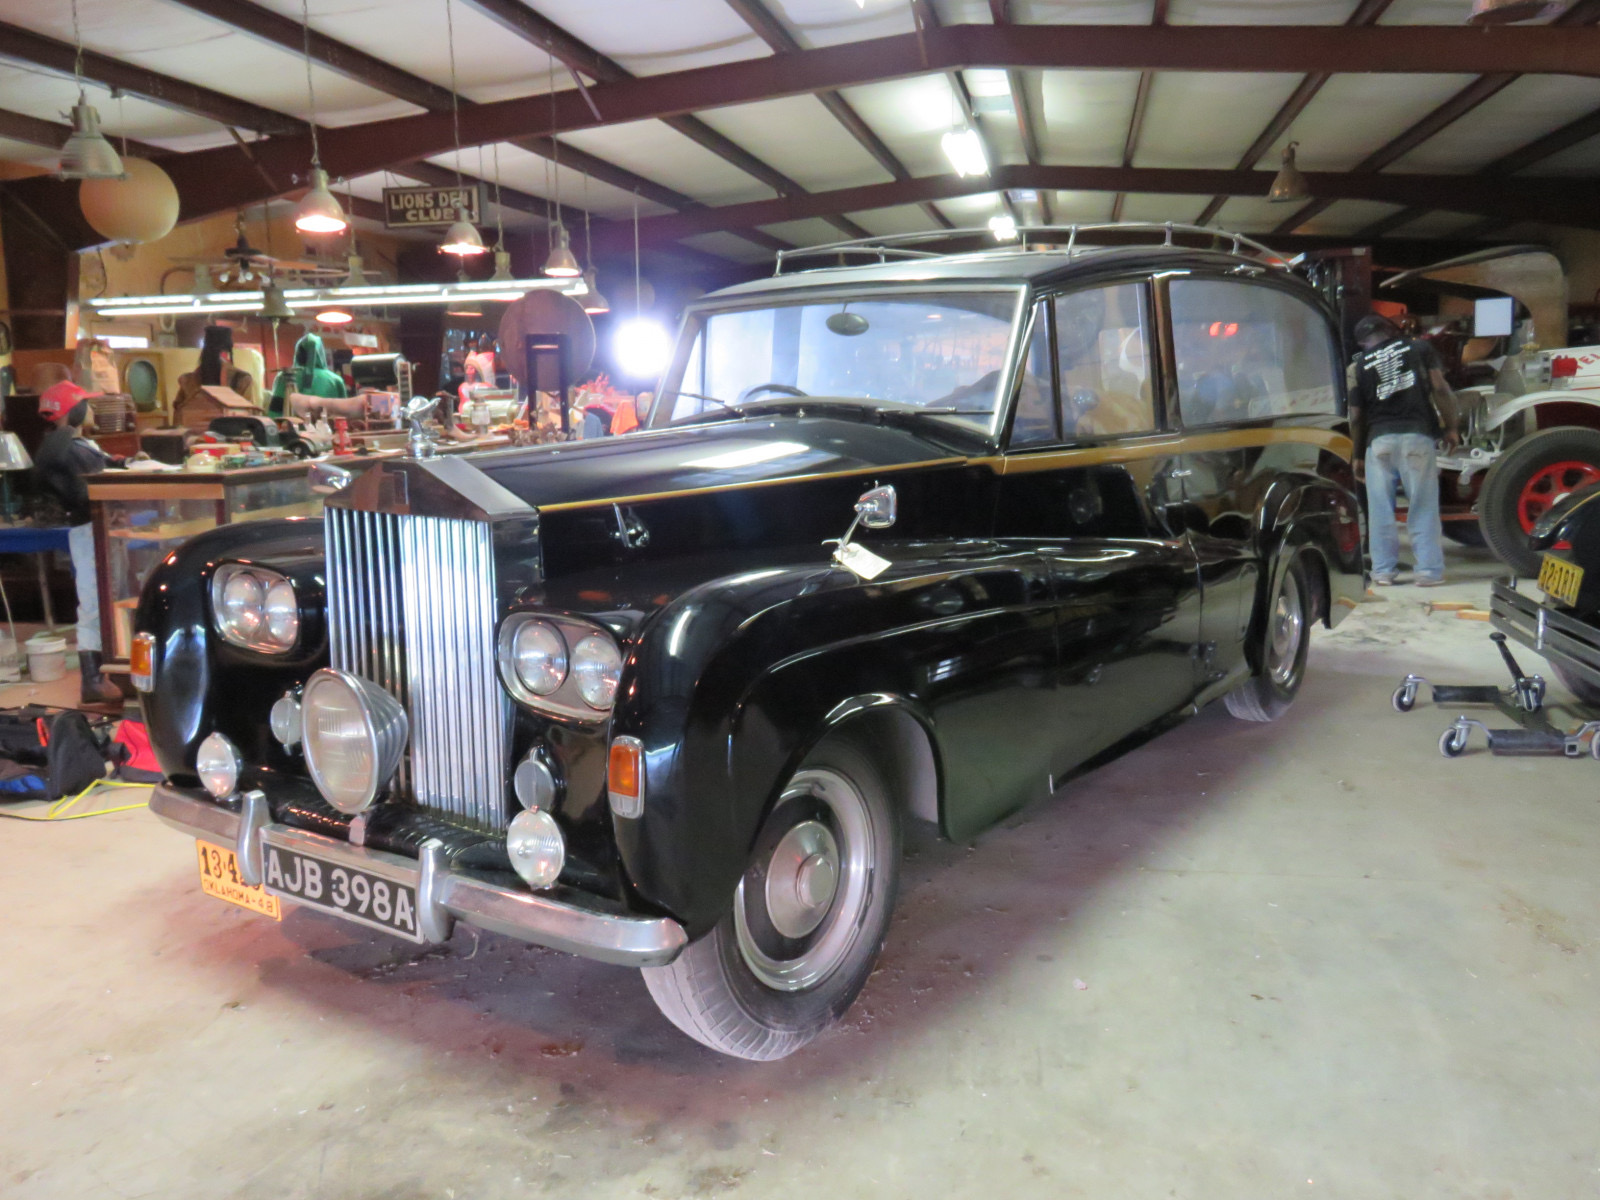 , Trucks, fire engines and more in VanDerBrink’s Lewis collection sale, ClassicCars.com Journal